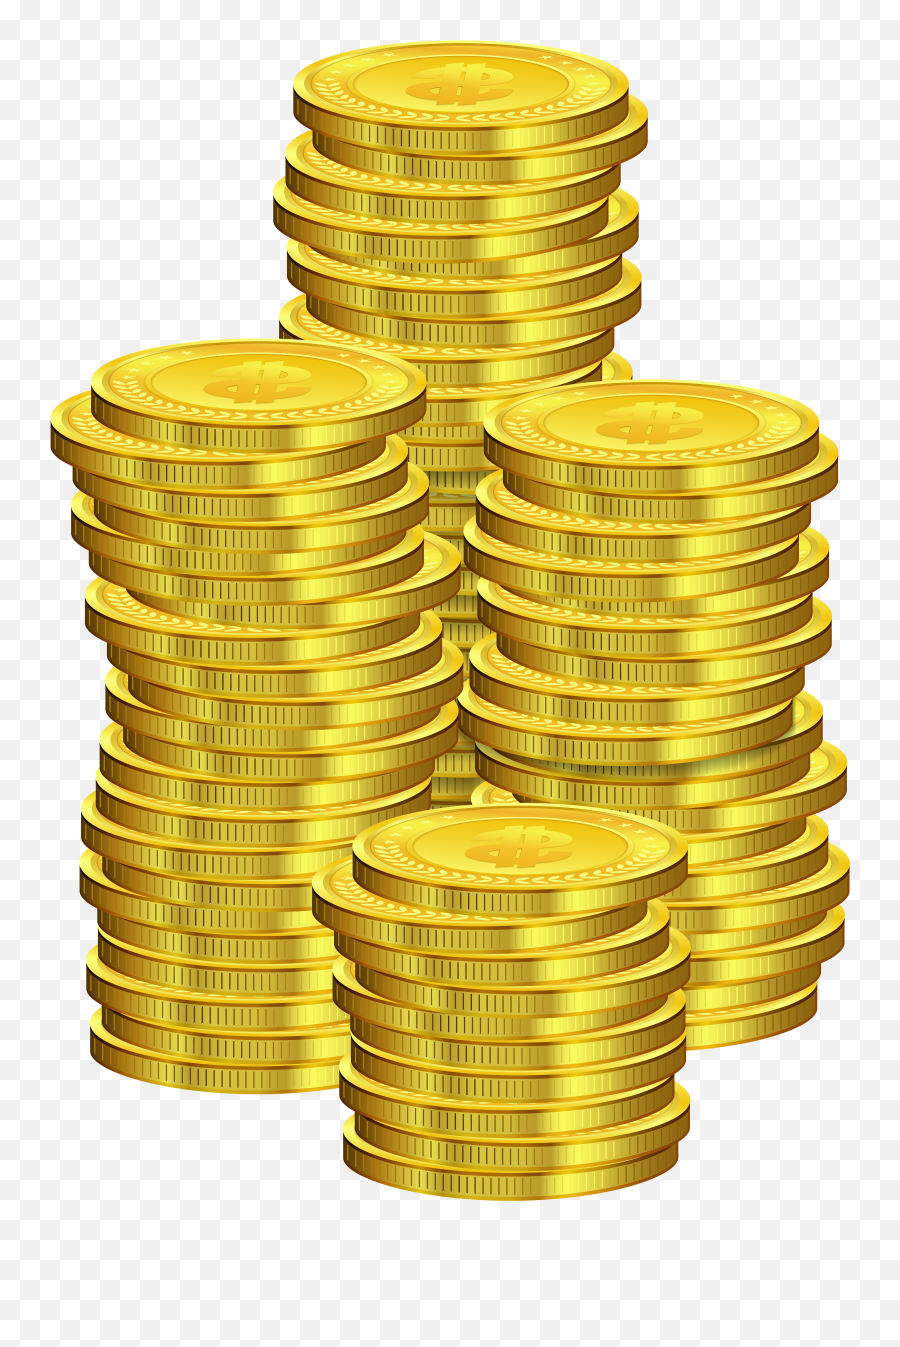 Library Of Money Jpg Free Transparent Png Clip Art